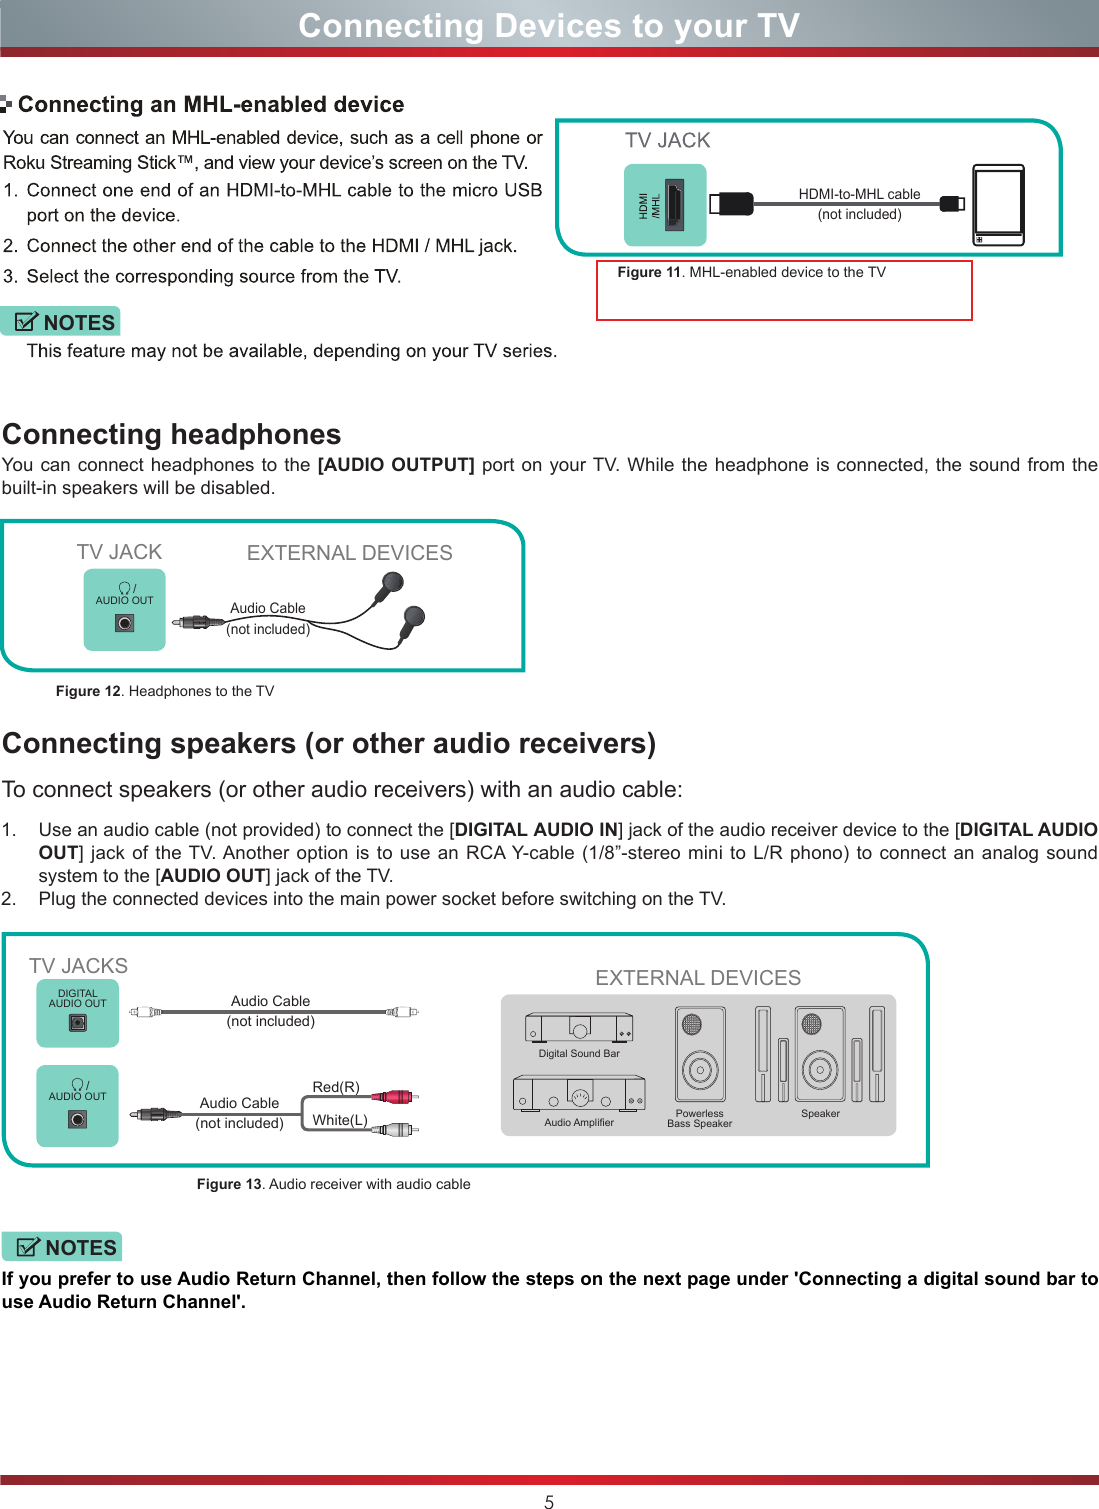 5Connecting Devices to your TV       /AUDIO OUTEXTERNAL DEVICESEXTERNAL DEVICESPowerless Bass SpeakerSpeakerAudio AmplierDigital Sound BarDIGITALAUDIO OUT       /AUDIO OUTConnecting speakers (or other audio receivers)To connect speakers (or other audio receivers) with an audio cable:Connecting headphones 1.  Use an audio cable (not provided) to connect the [DIGITAL AUDIO IN] jack of the audio receiver device to the [DIGITAL AUDIO OUT] jack of the TV. Another option is to use an RCA Y-cable (1/8”-stereo mini to L/R phono) to connect an analog sound system to the [AUDIO OUT] jack of the TV.2.  Plug the connected devices into the main power socket before switching on the TV.You can connect headphones to the [AUDIO OUTPUT] port on your TV. While the headphone is connected, the sound from the built-in speakers will be disabled.Figure 12. Headphones to the TVFigure 13. Audio receiver with audio cableTV JACKAudio Cable (not included)HDMI-to-MHL cable (not included)TV JACKSWhite(L)Red(R)Audio Cable (not included)Audio Cable (not included)If you prefer to use Audio Return Channel, then follow the steps on the next page under &apos;Connecting a digital sound bar to use Audio Return Channel&apos;.NOTESNOTESFigure 11. MHL-enabled device to the TV